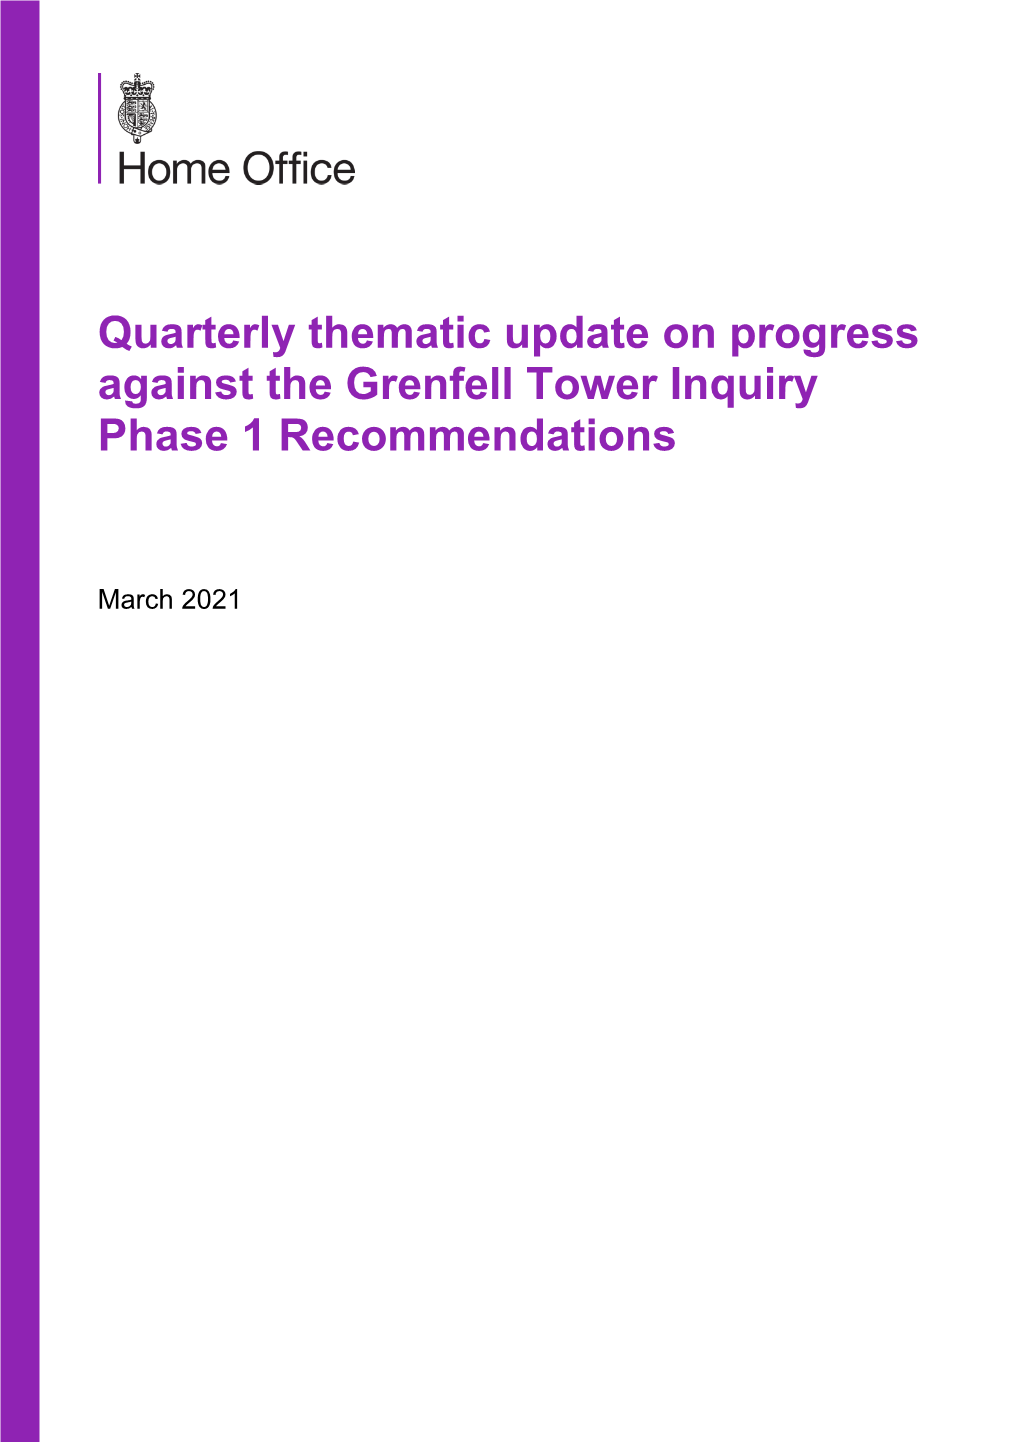 Progress Against the Grenfell Tower Inquiry Phase 1 Recommendations